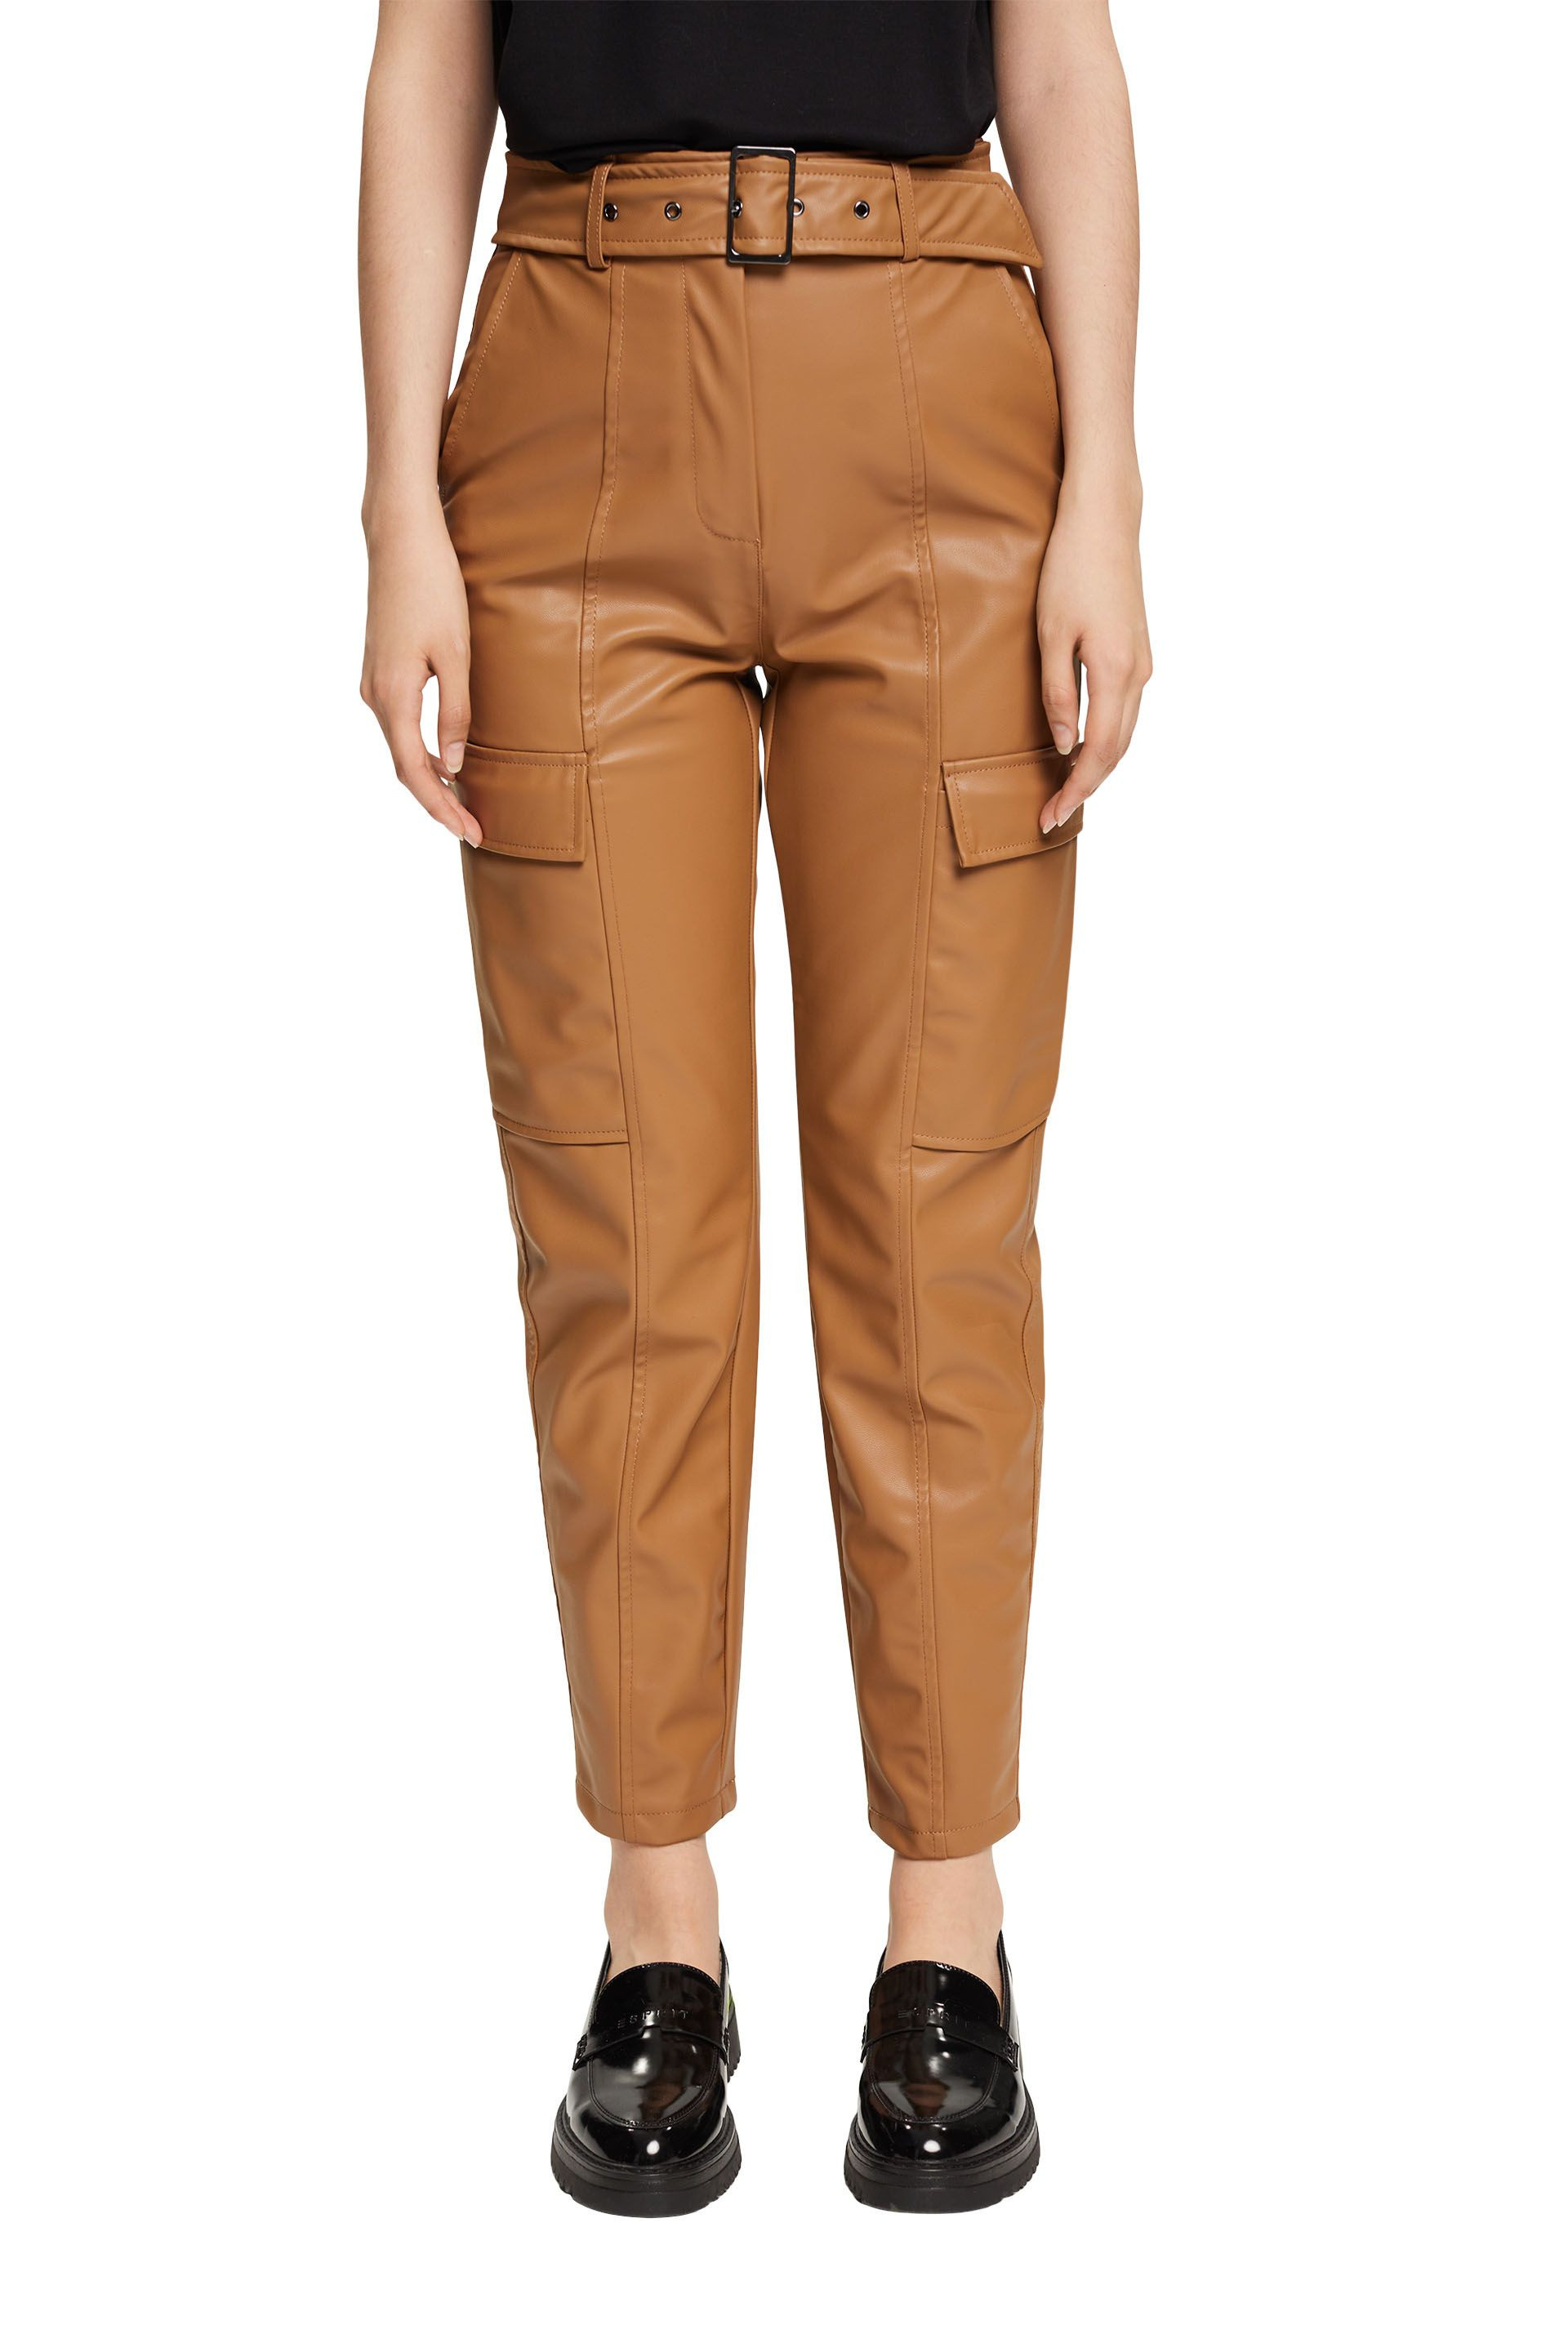 Faux leather trousers with belt, Light Brown, large image number 1